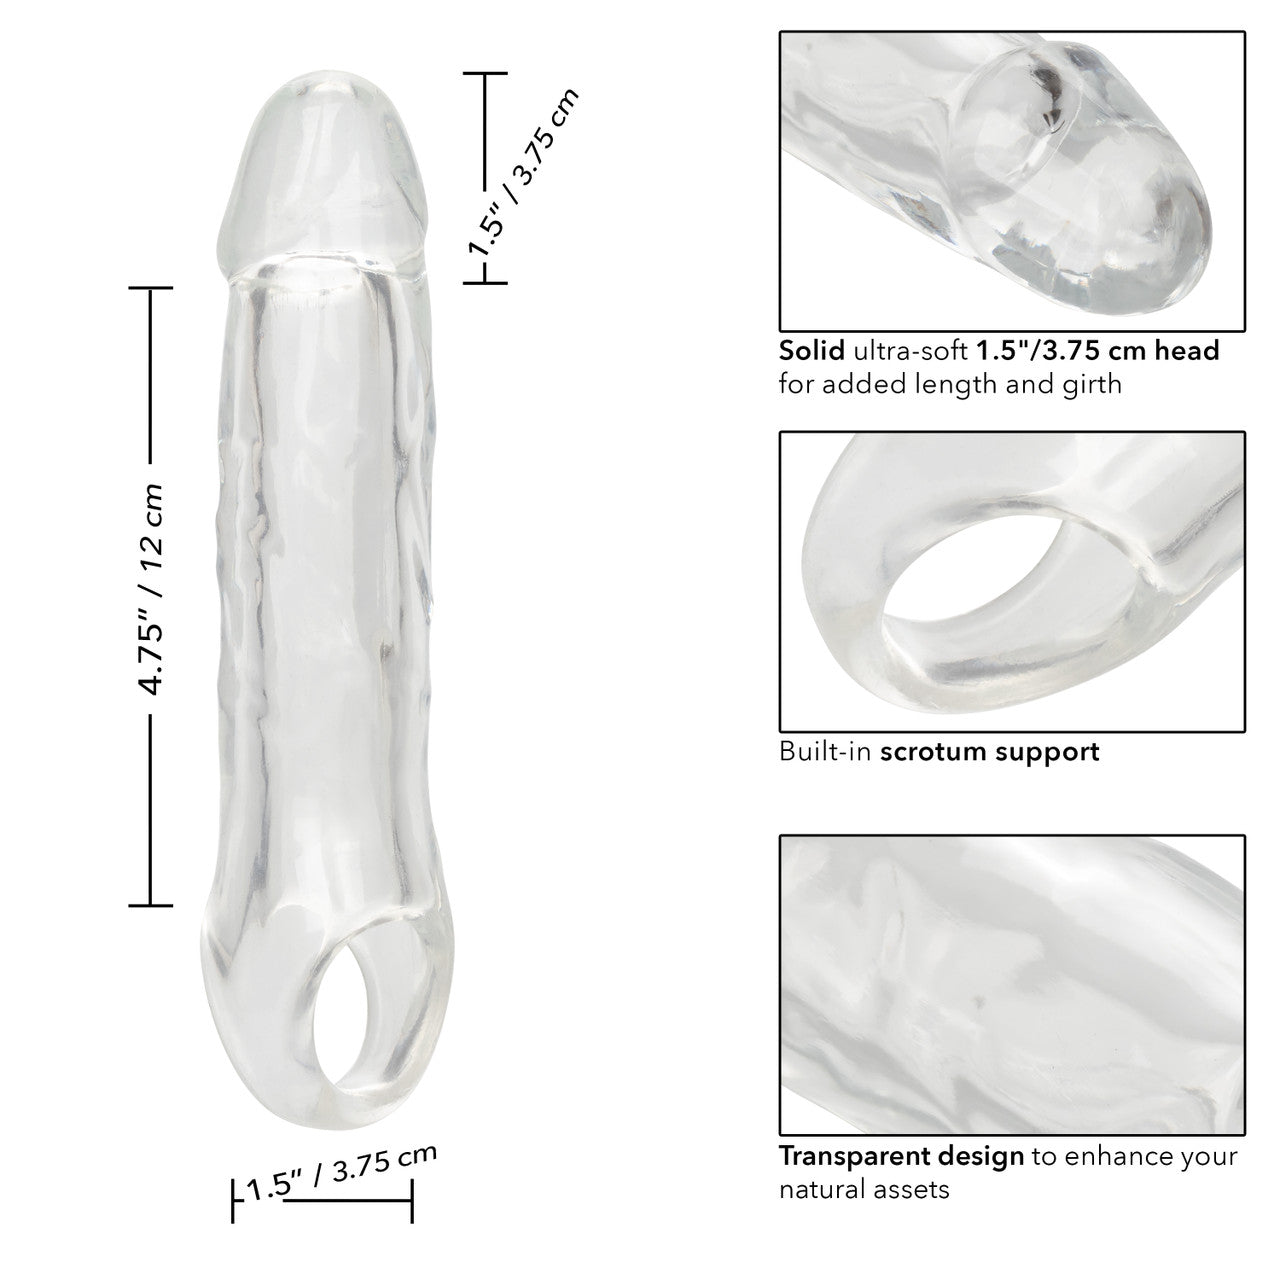 Performance Maxx Clear Extension 6.5"